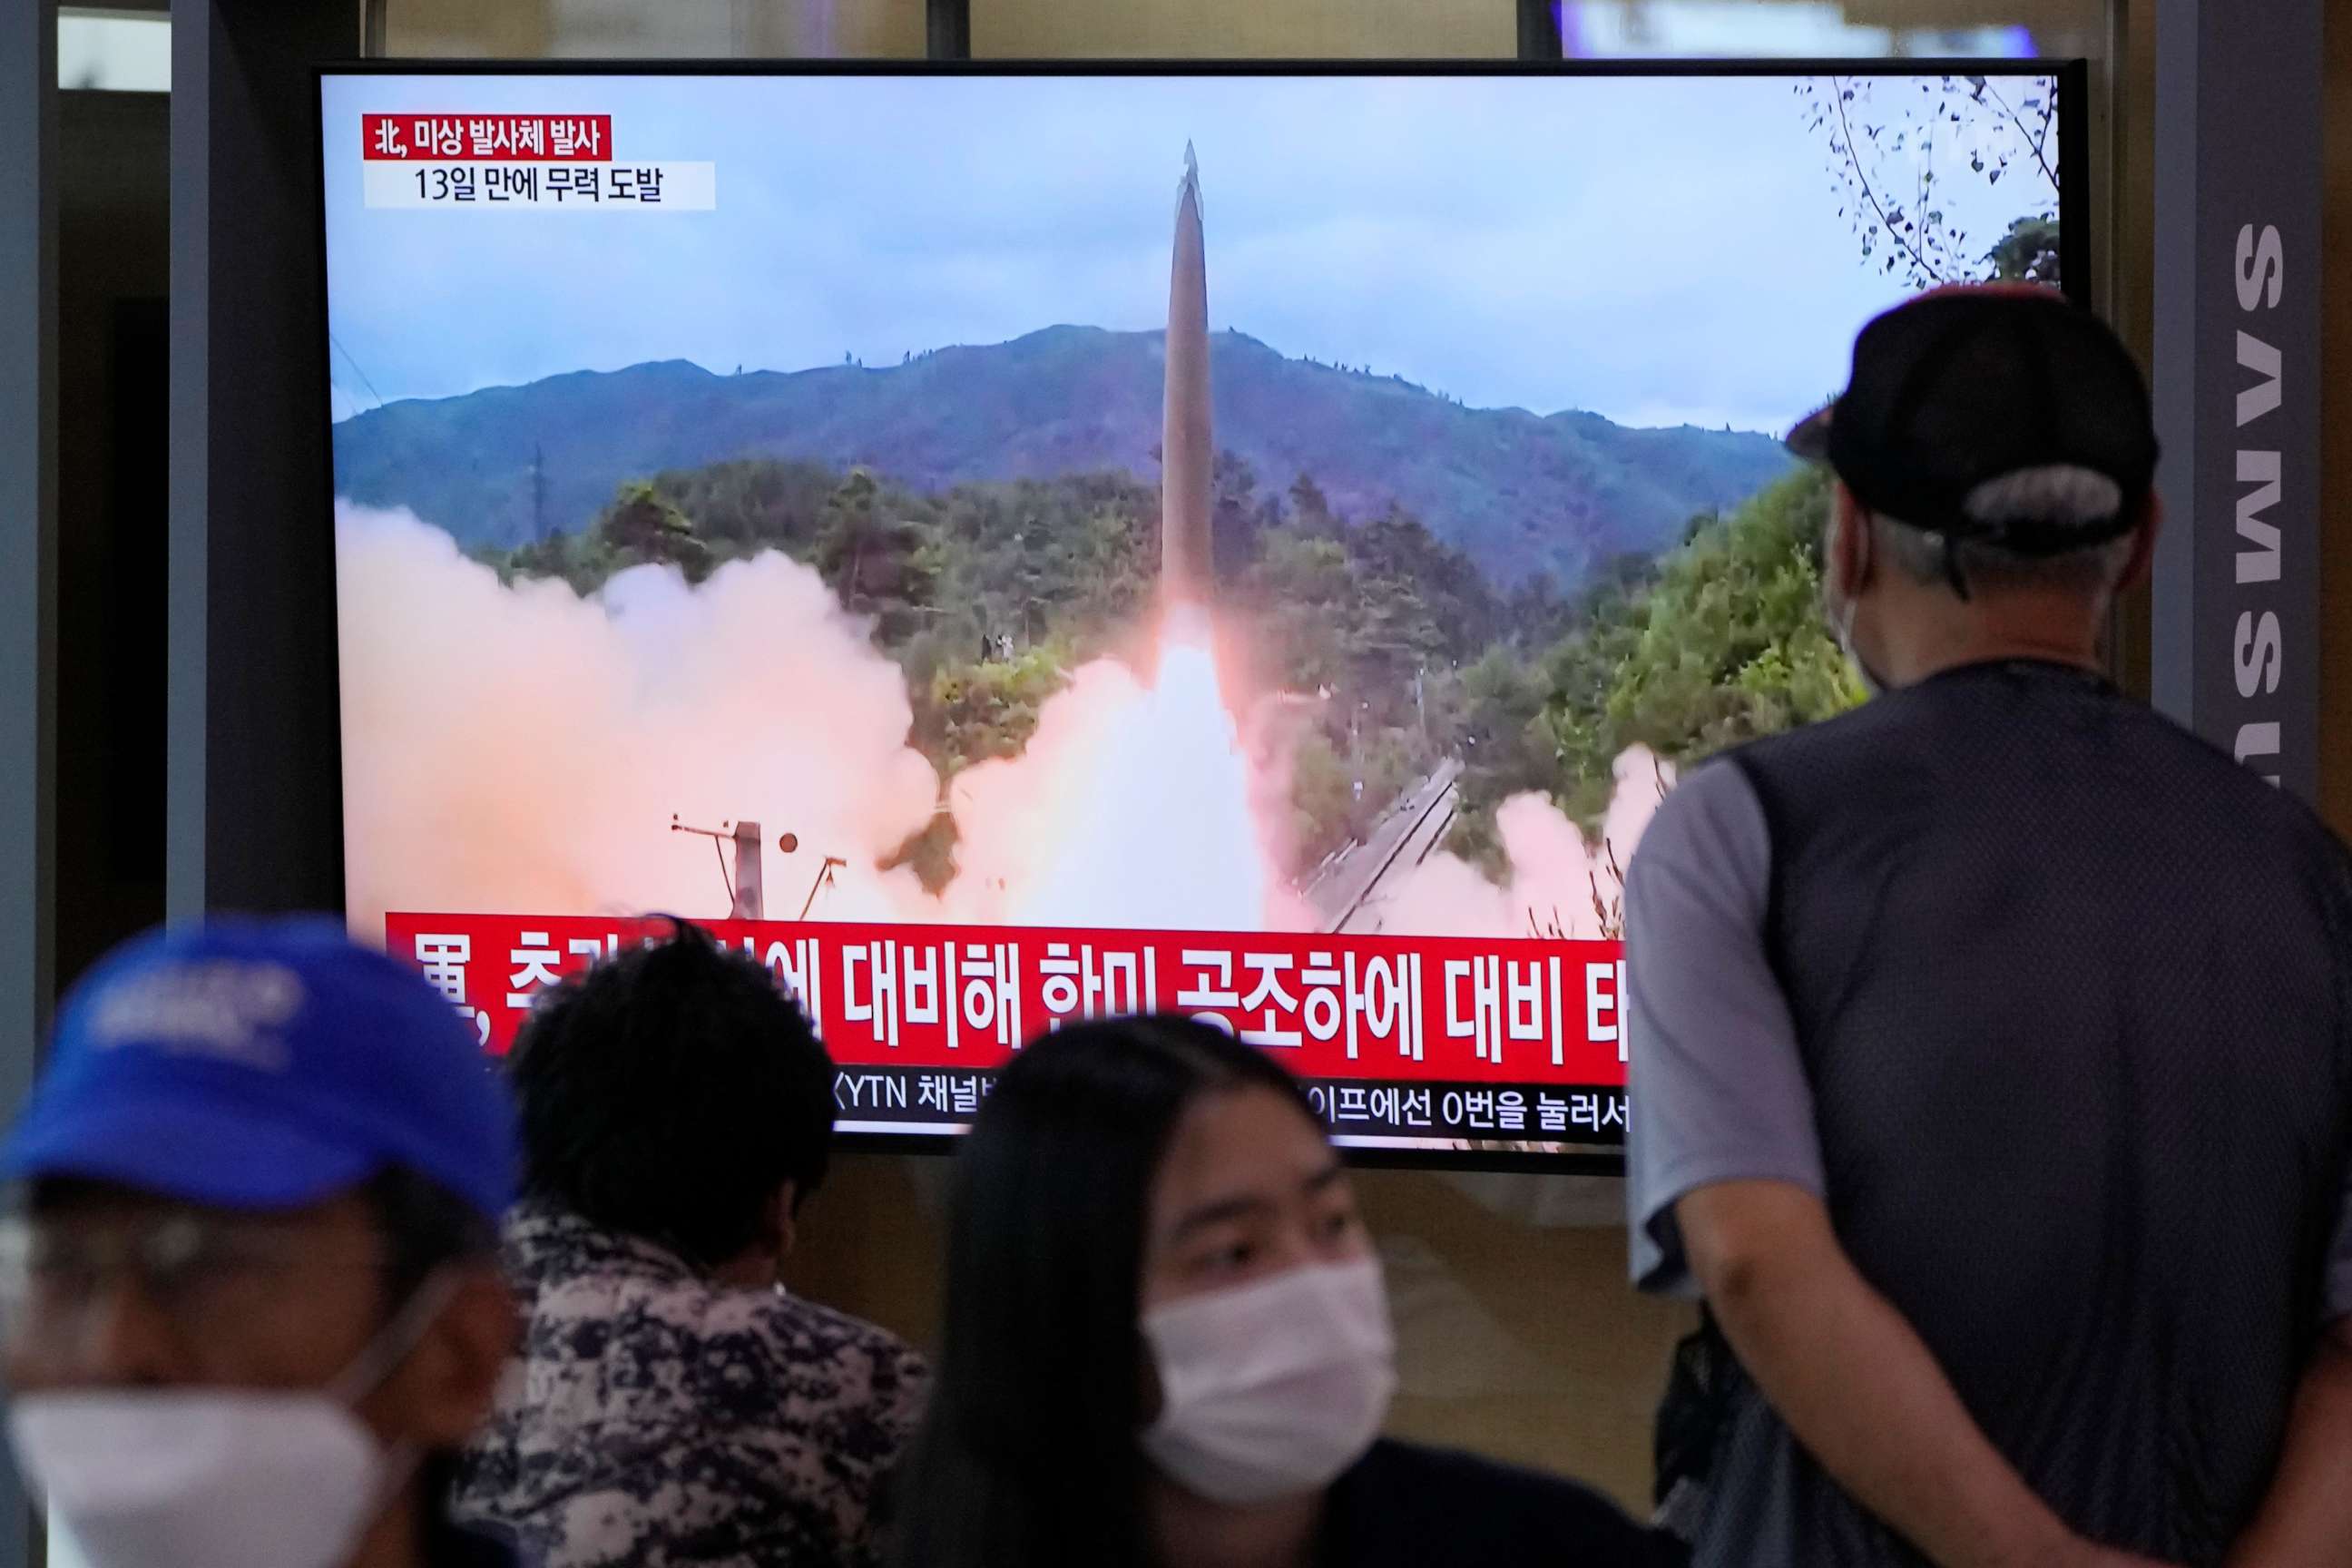 PHOTO: People watch a news program on a television at the railway station in Seoul, South Korea, showing a file image of North Korea's missile launch on Sept. 28, 2021.